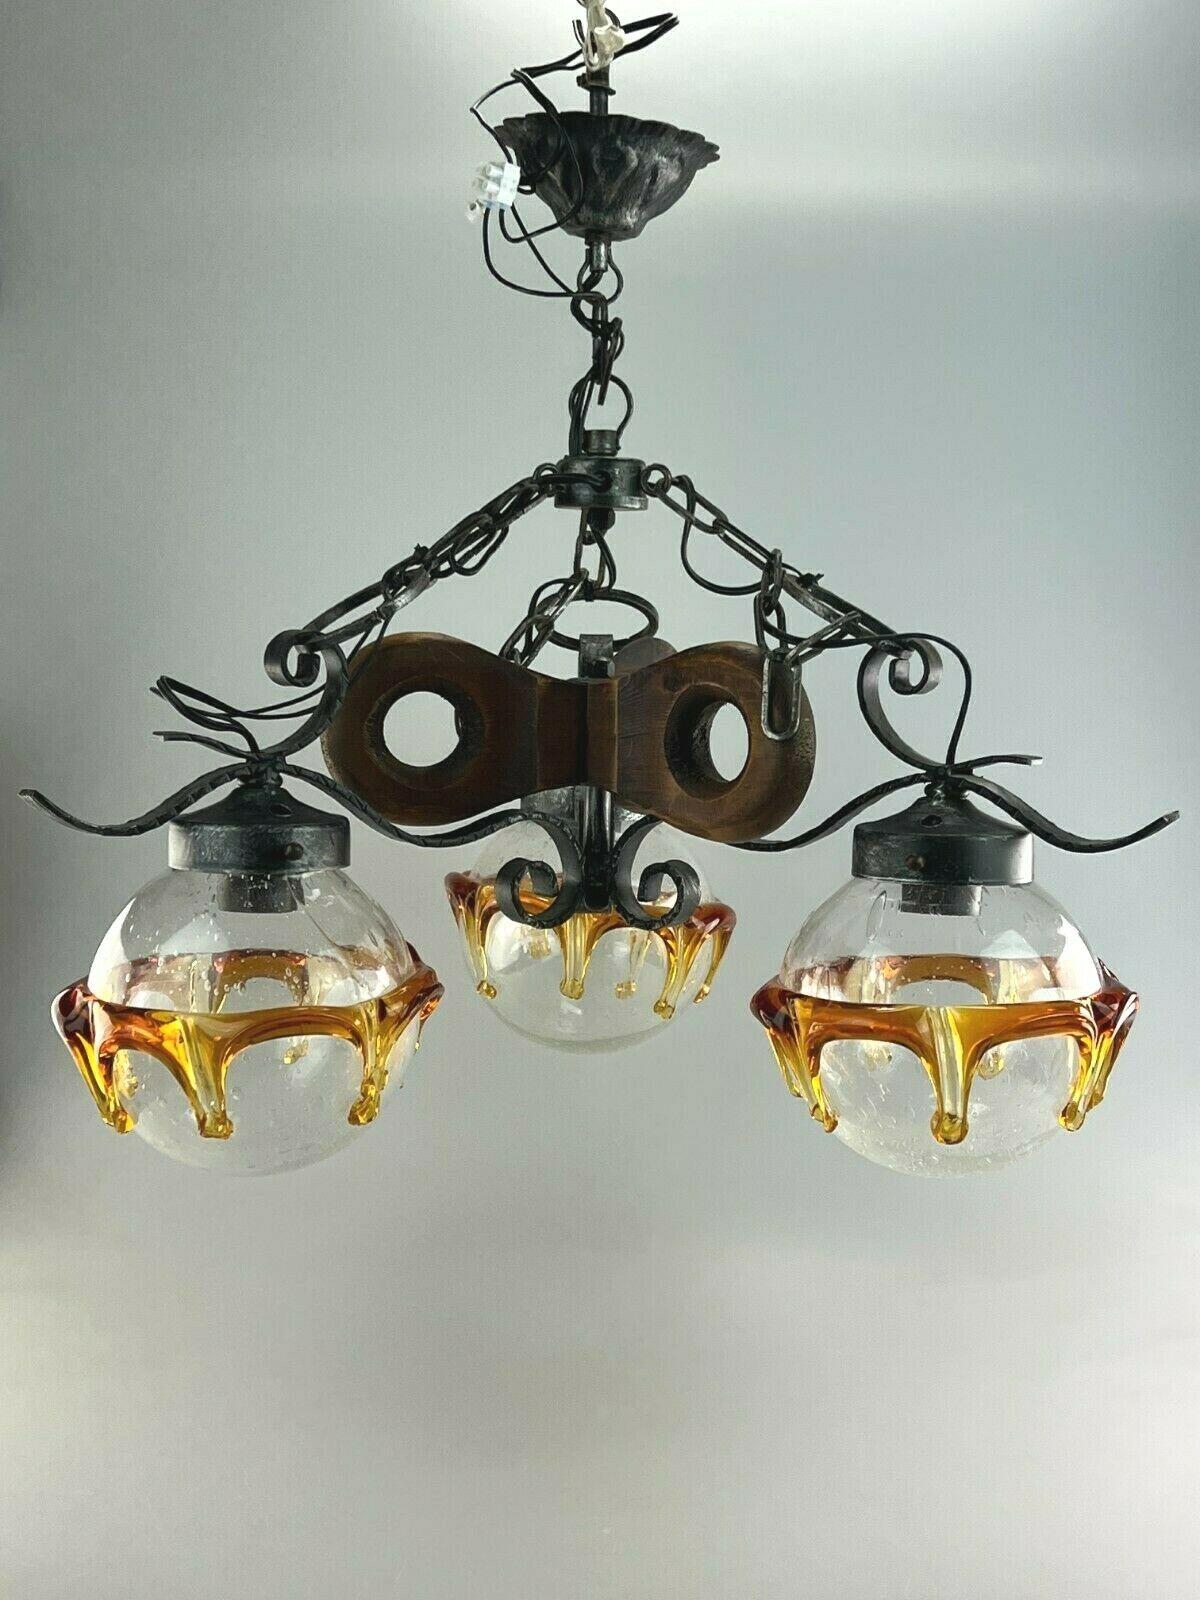 60s 70s Brutalist Ceiling Lamp Hanging Lamp Iron & Murano Glass 60s

Object: ceiling lamp

Manufacturer:

Condition: good - vintage

Age: around 1960-1970

Dimensions:

Diameter 50cm
Height = 55cm

Other notes:

The pictures serve